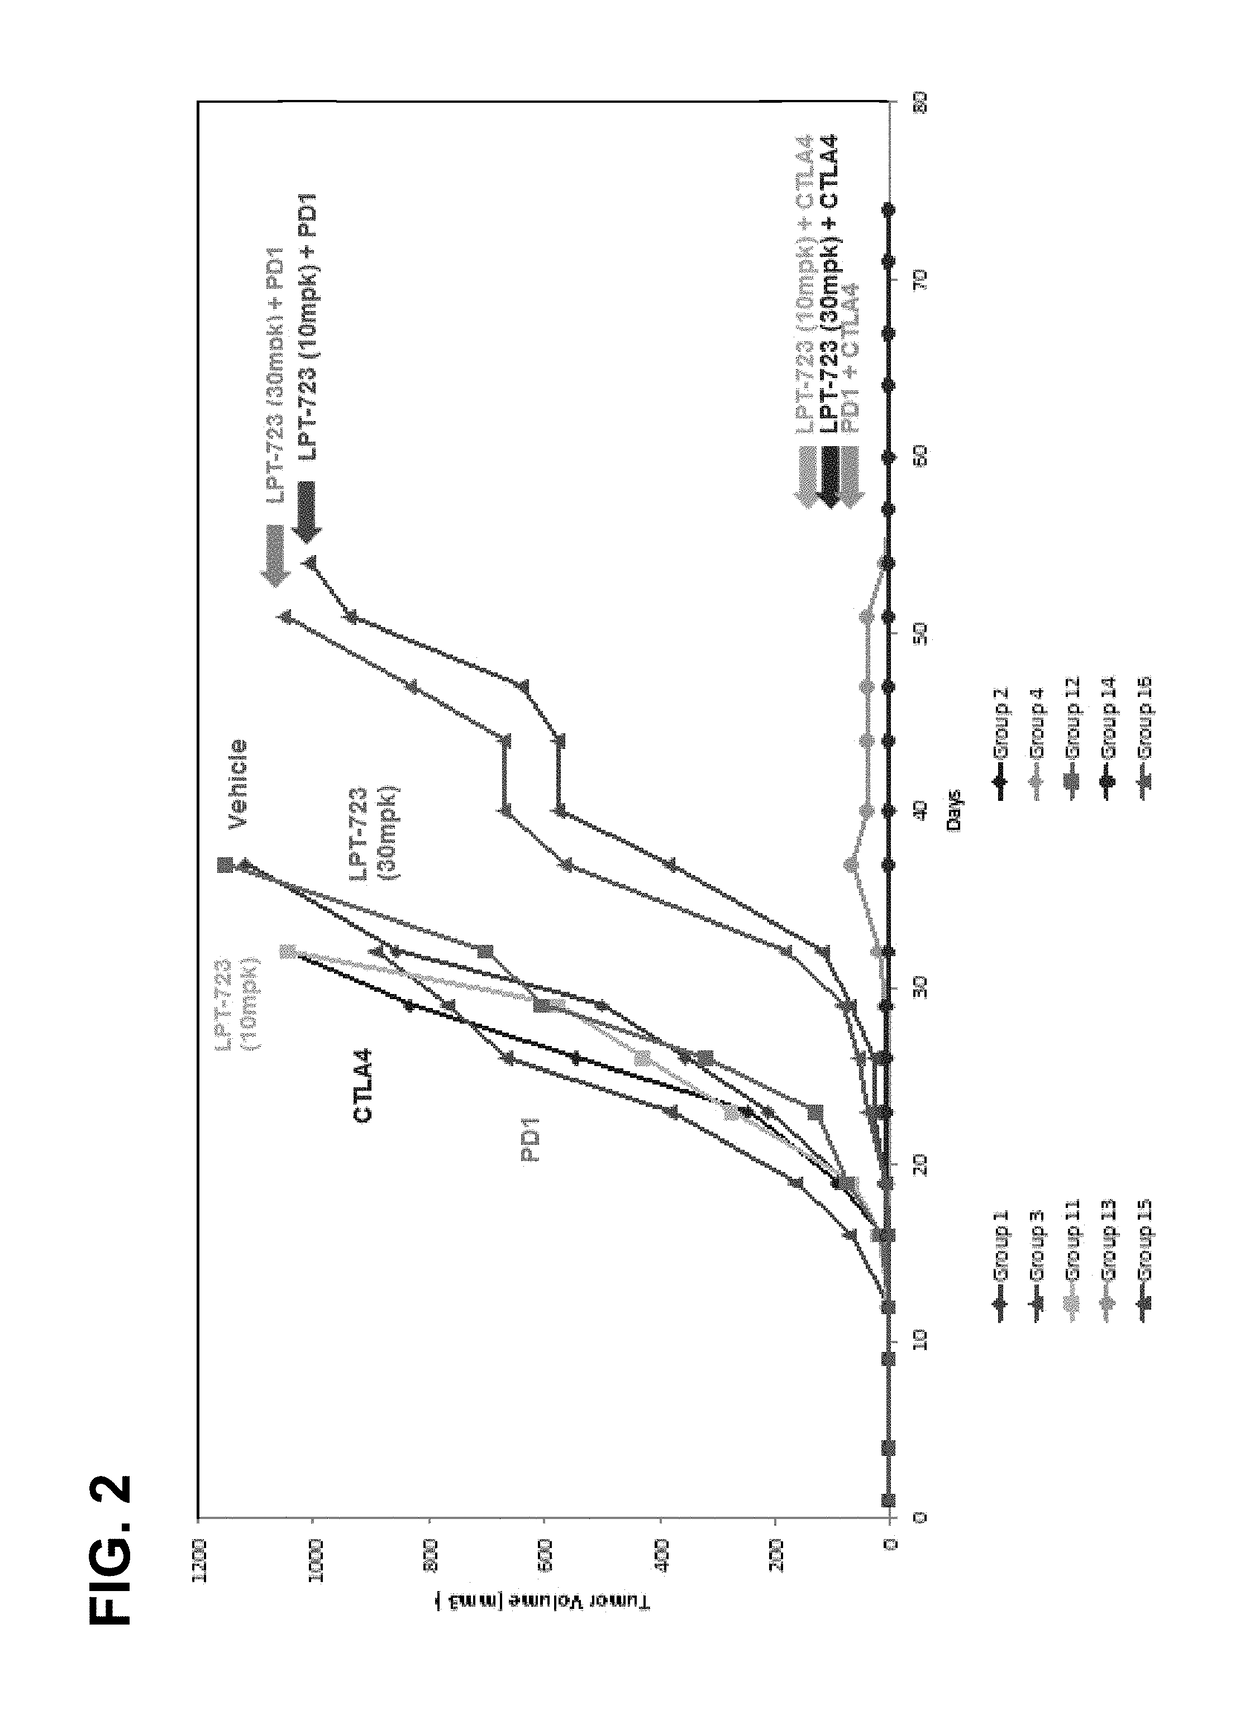 LPT-723 and immune checkpoint inhibitor combinations and methods of treatment